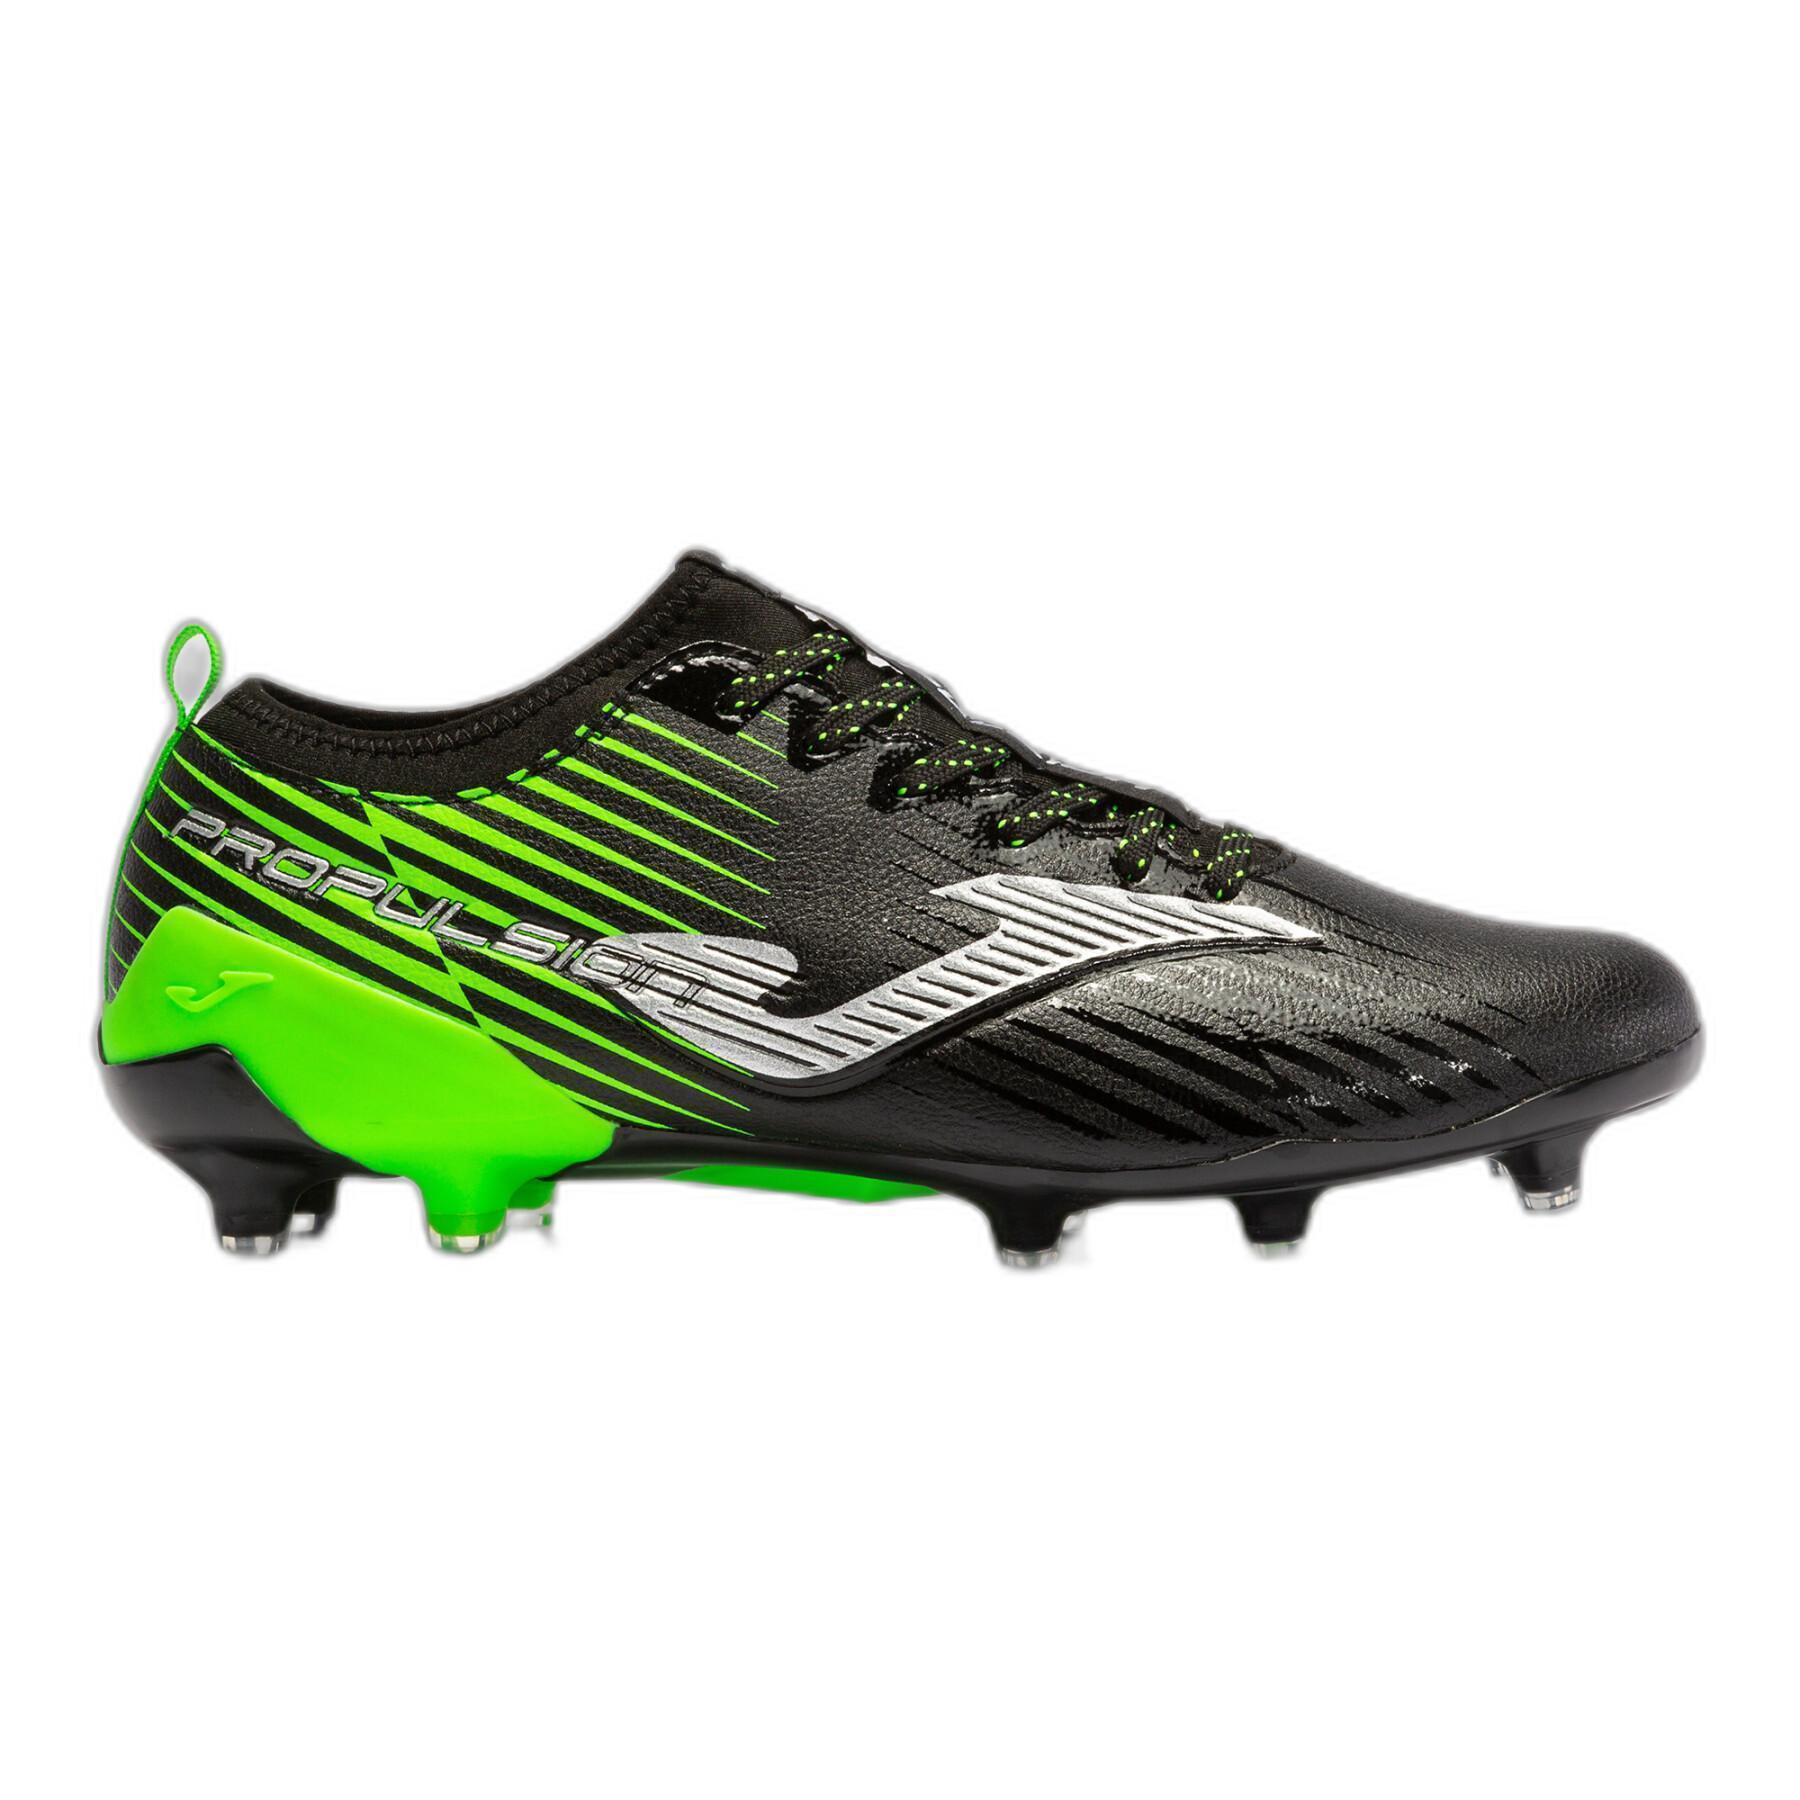 Chaussures de football Joma Propulsion Cup 2301 FG